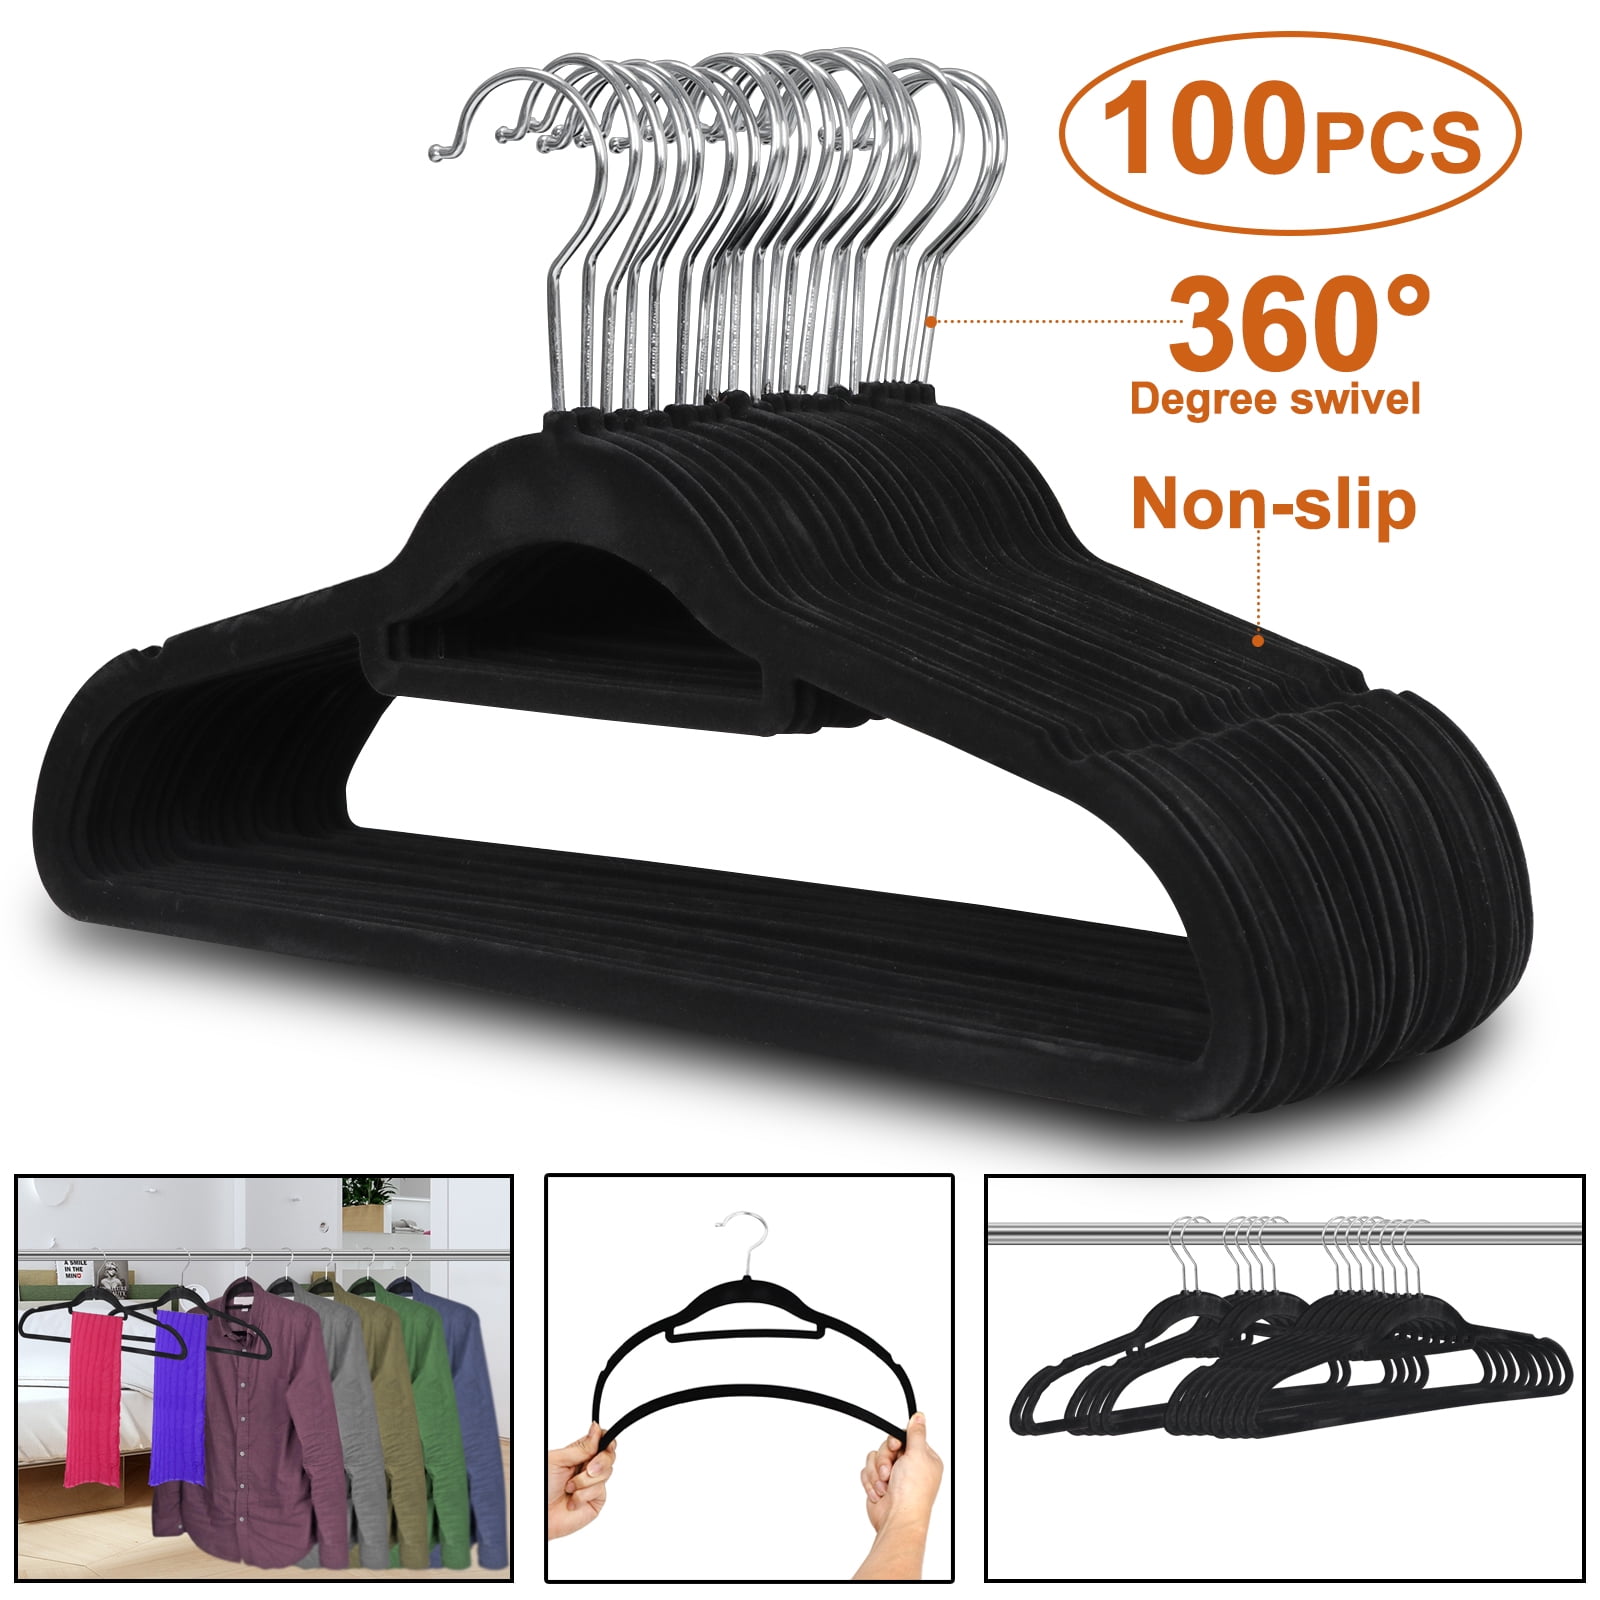 Velvet Hangers Non-Slip Flocked Clothes Hangers 25 Pack Ultra Thin Space Saving Design for Men and Women Dress Suit Heavy Duty Construction with 360 Degree Swivel Hook 